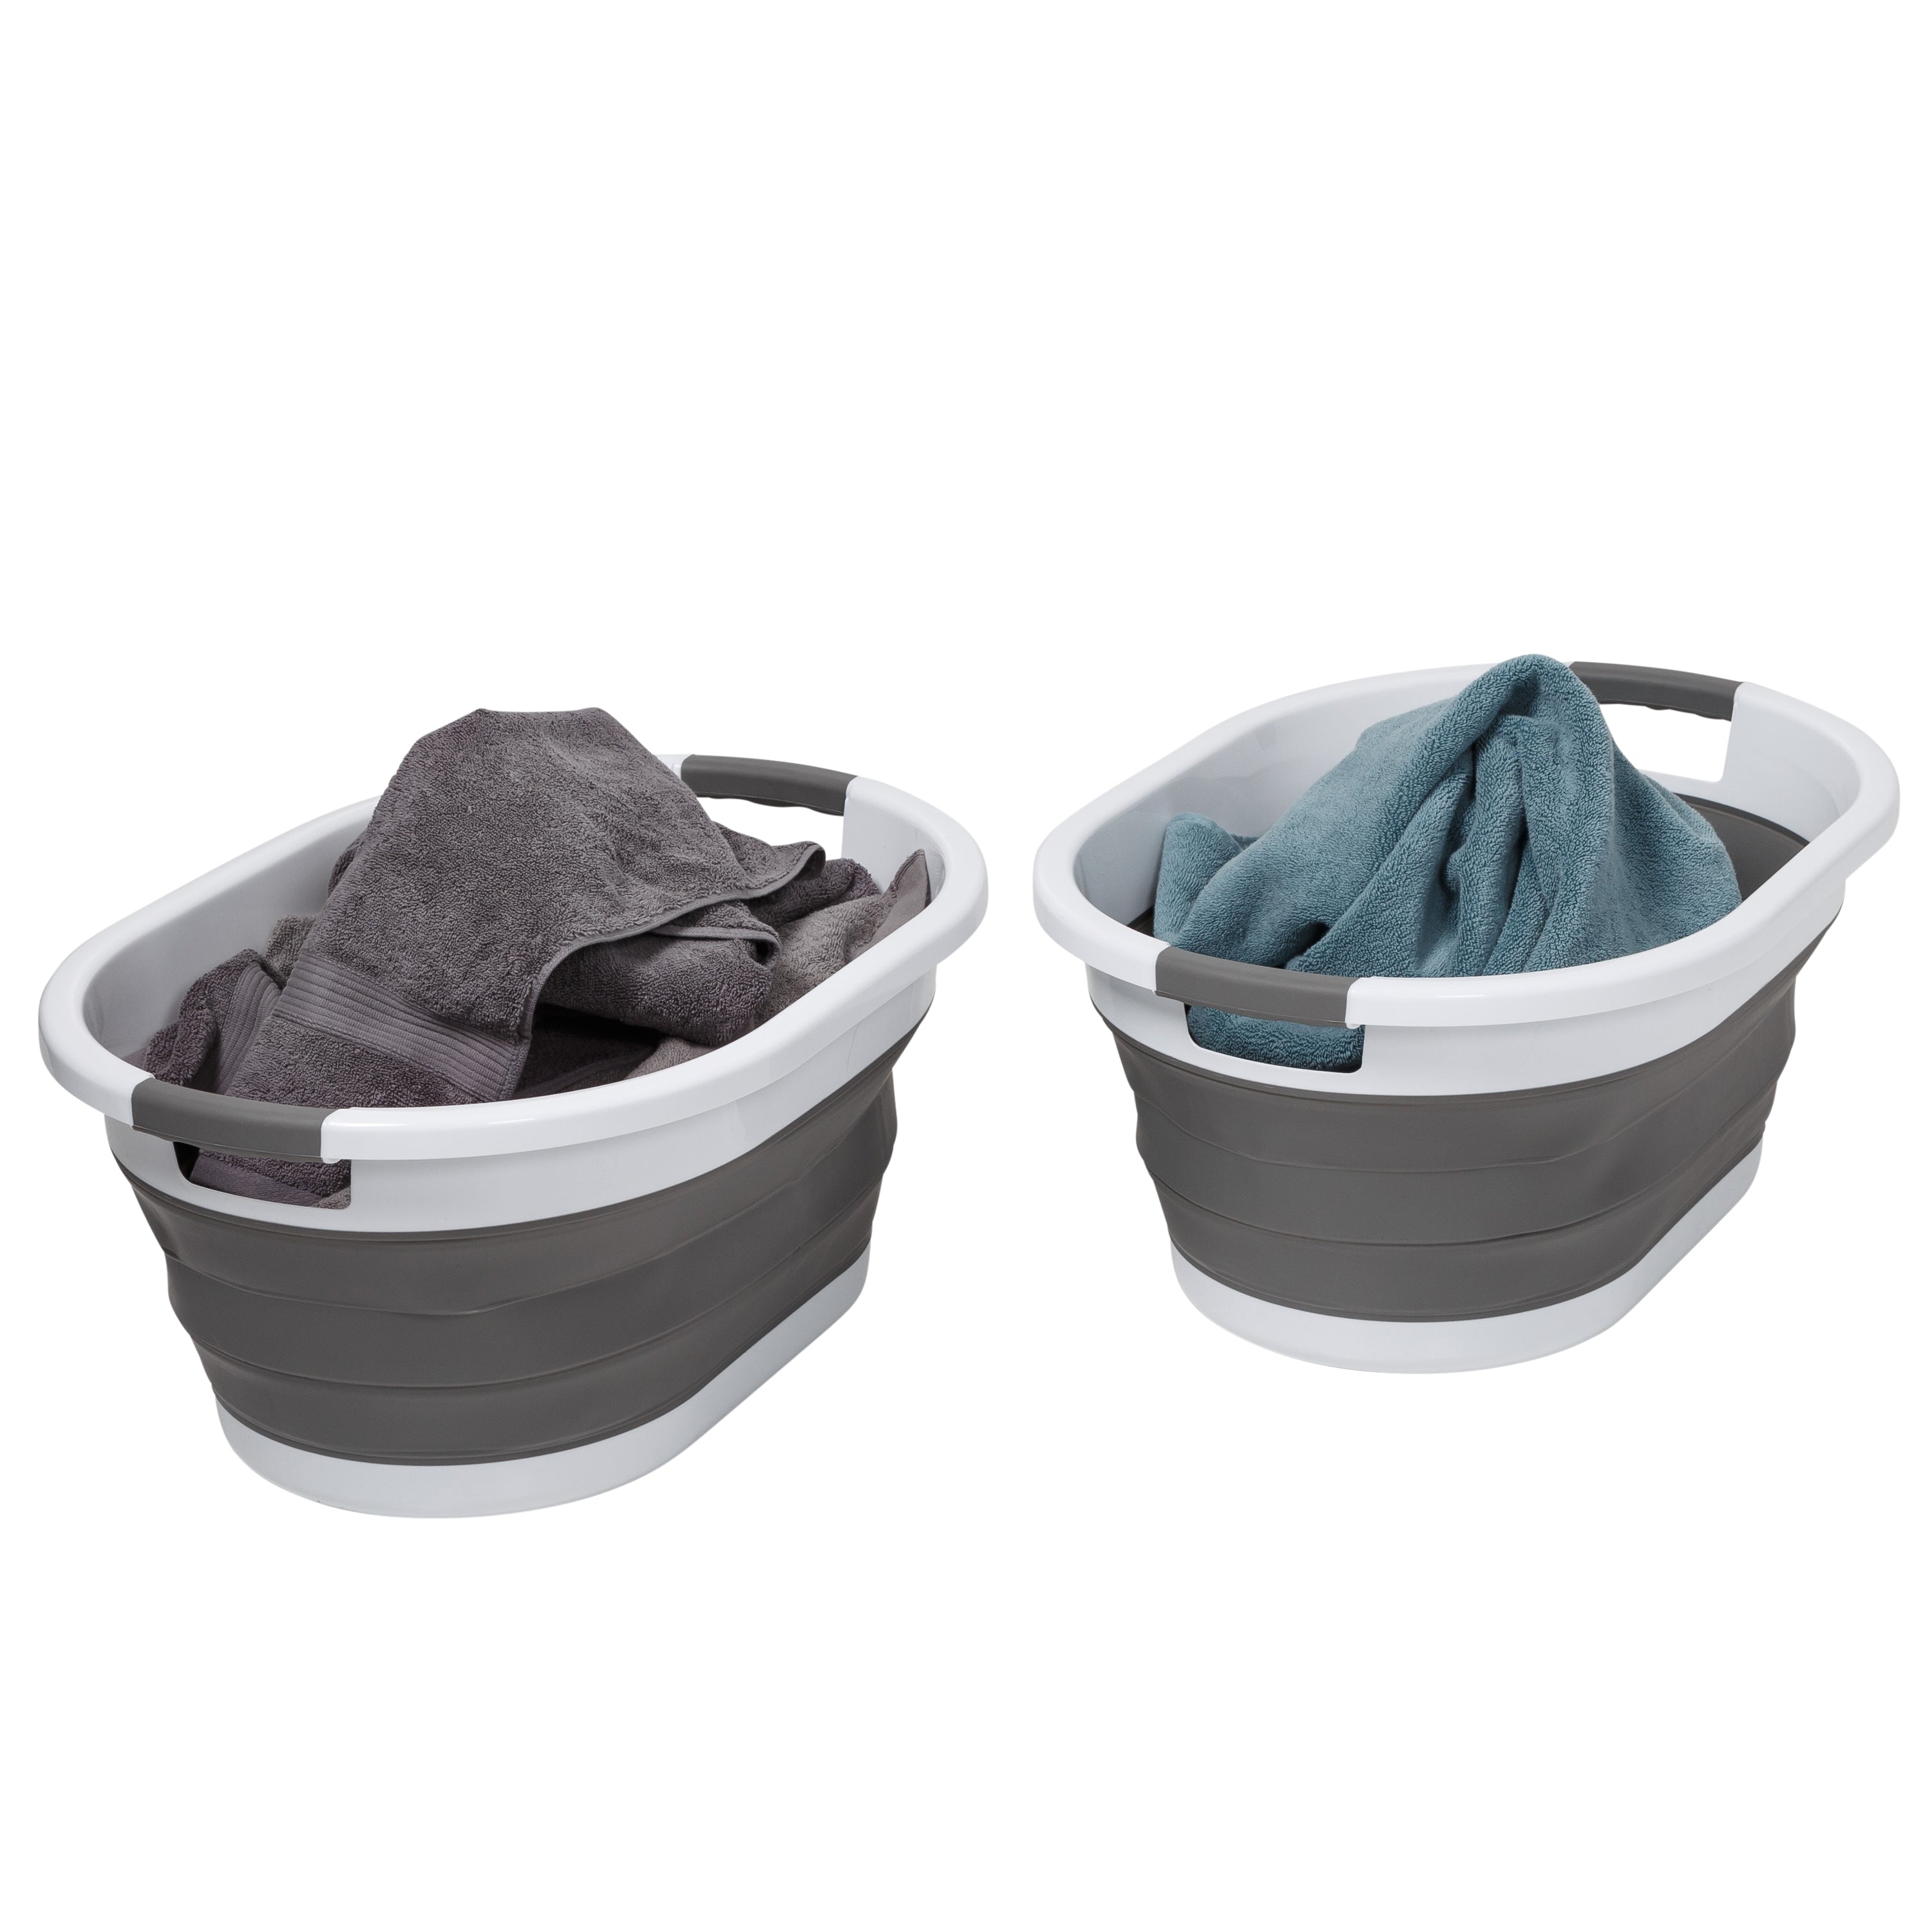 Honey-Can-Do Warm Gray & White Collapsible Laundry Baskets, 2-Pack